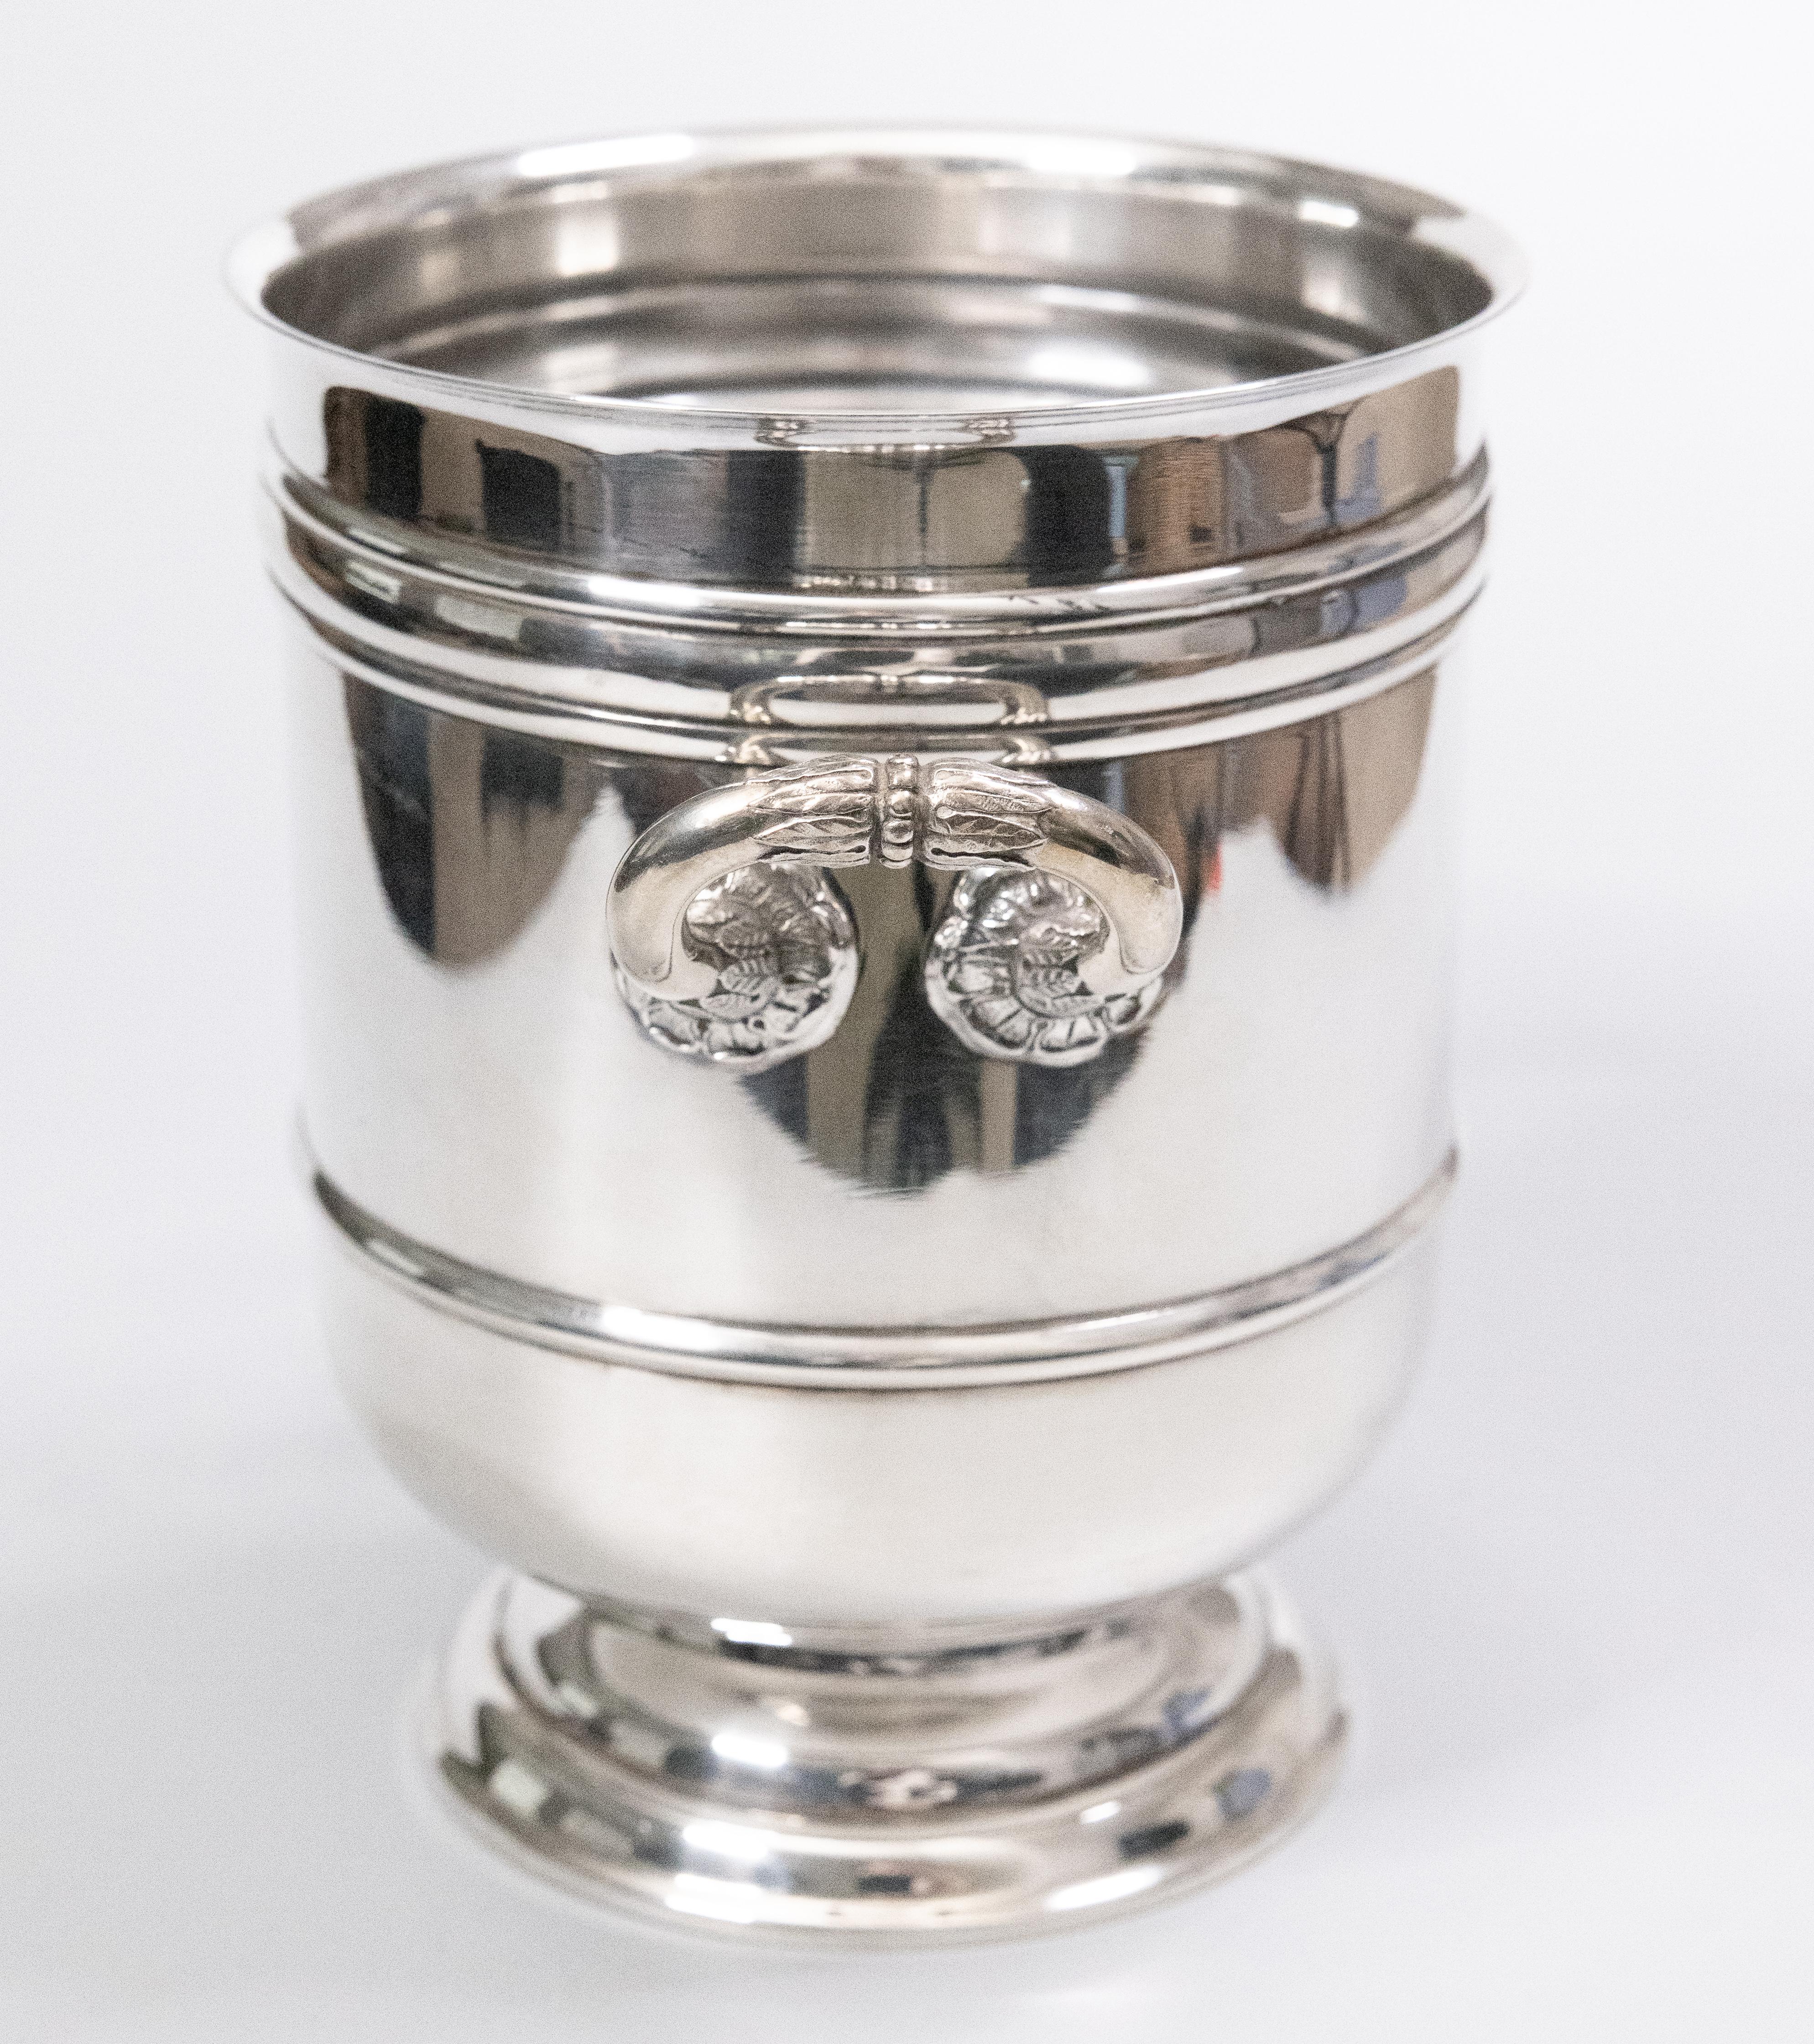 A superb vintage French Christofle silverplated petite ice bucket made in France. Hallmarked on reverse. This stylish ice bucket is solid and heavy with a sleek design, perfect for the modern home. Add the finest French silver to your barware